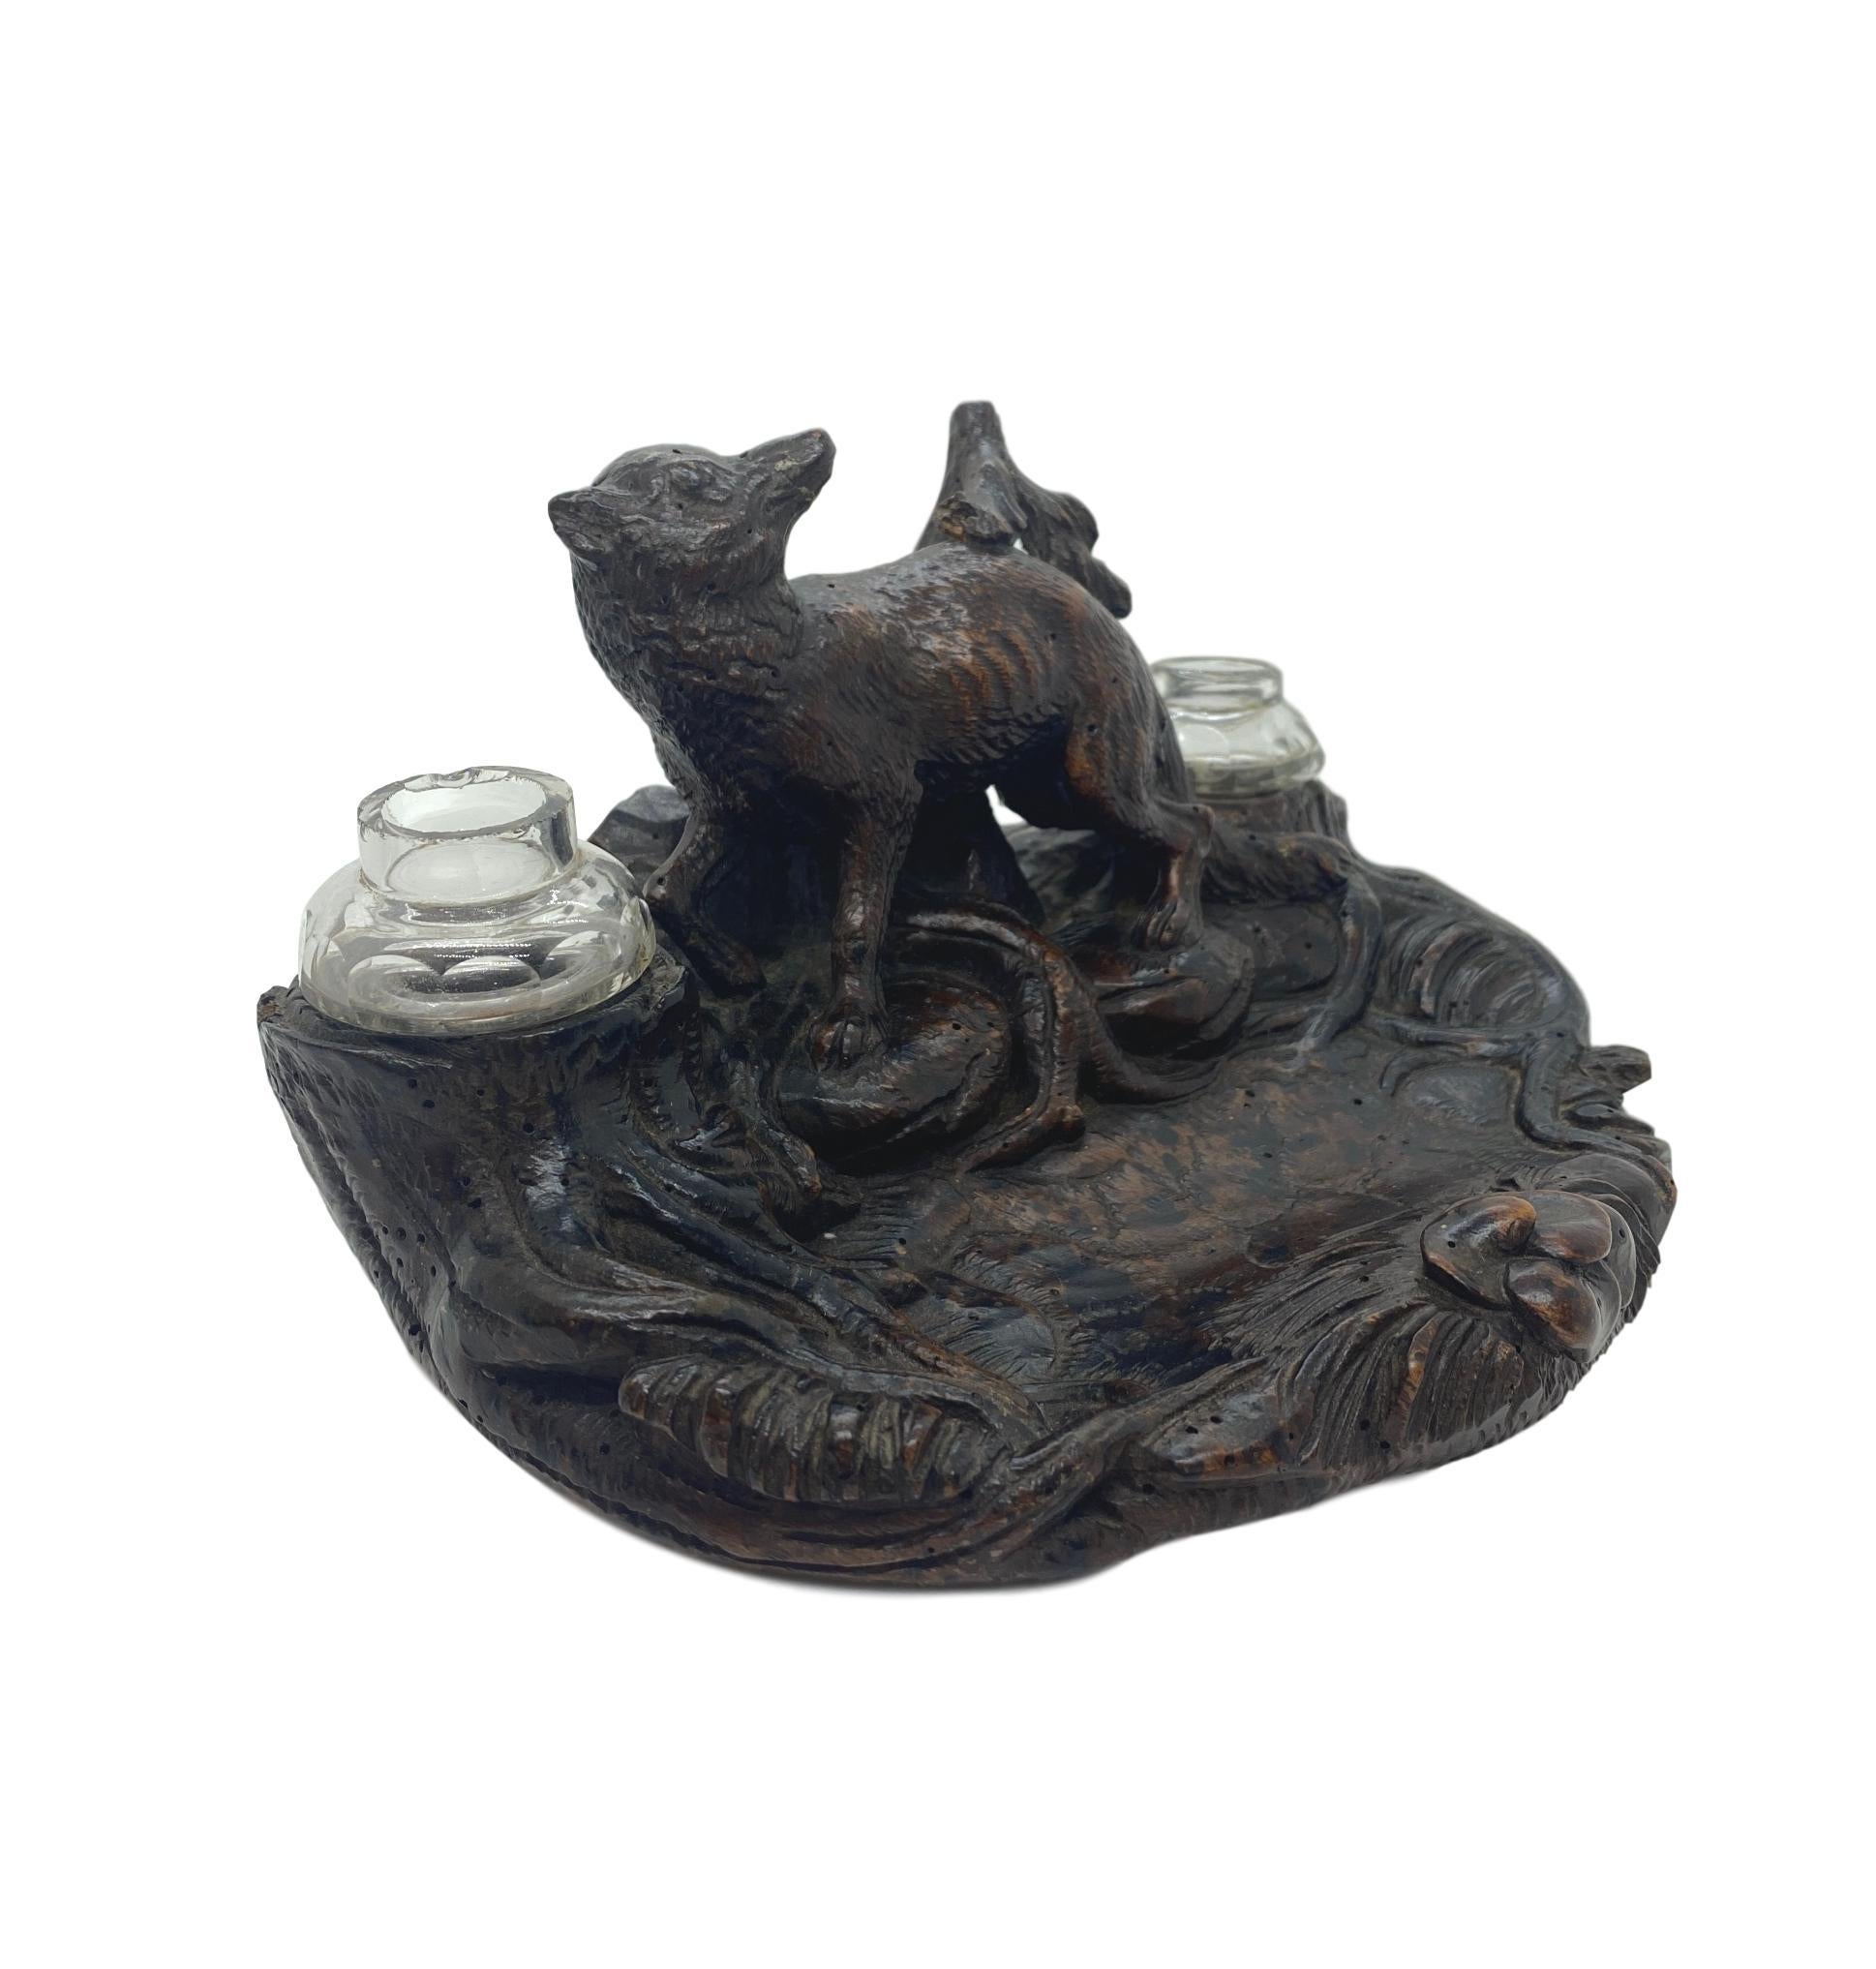 Black Forest Carved Inkstand, naturalistically hand-carved of solid linden wood, with the central figure of a fox among a rootwork base simulating a forest floor, with two tree stumps forming the inkpot holders, with two glass inkwells (chips to